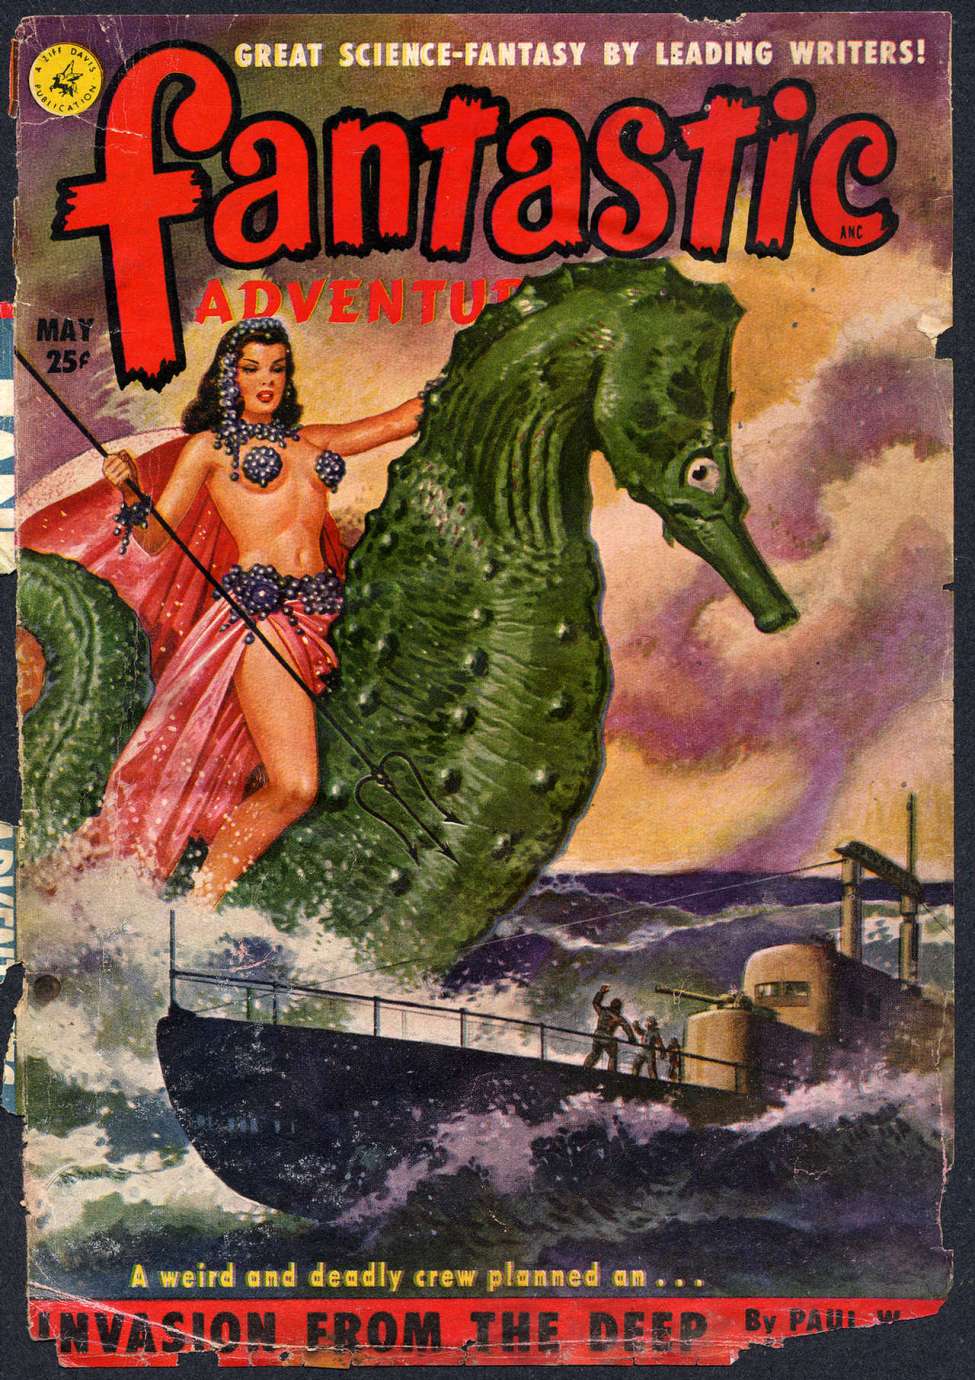 Book Cover For Fantastic Adventures v13 5 - Invasion from the Deep - Paul W. Fairman